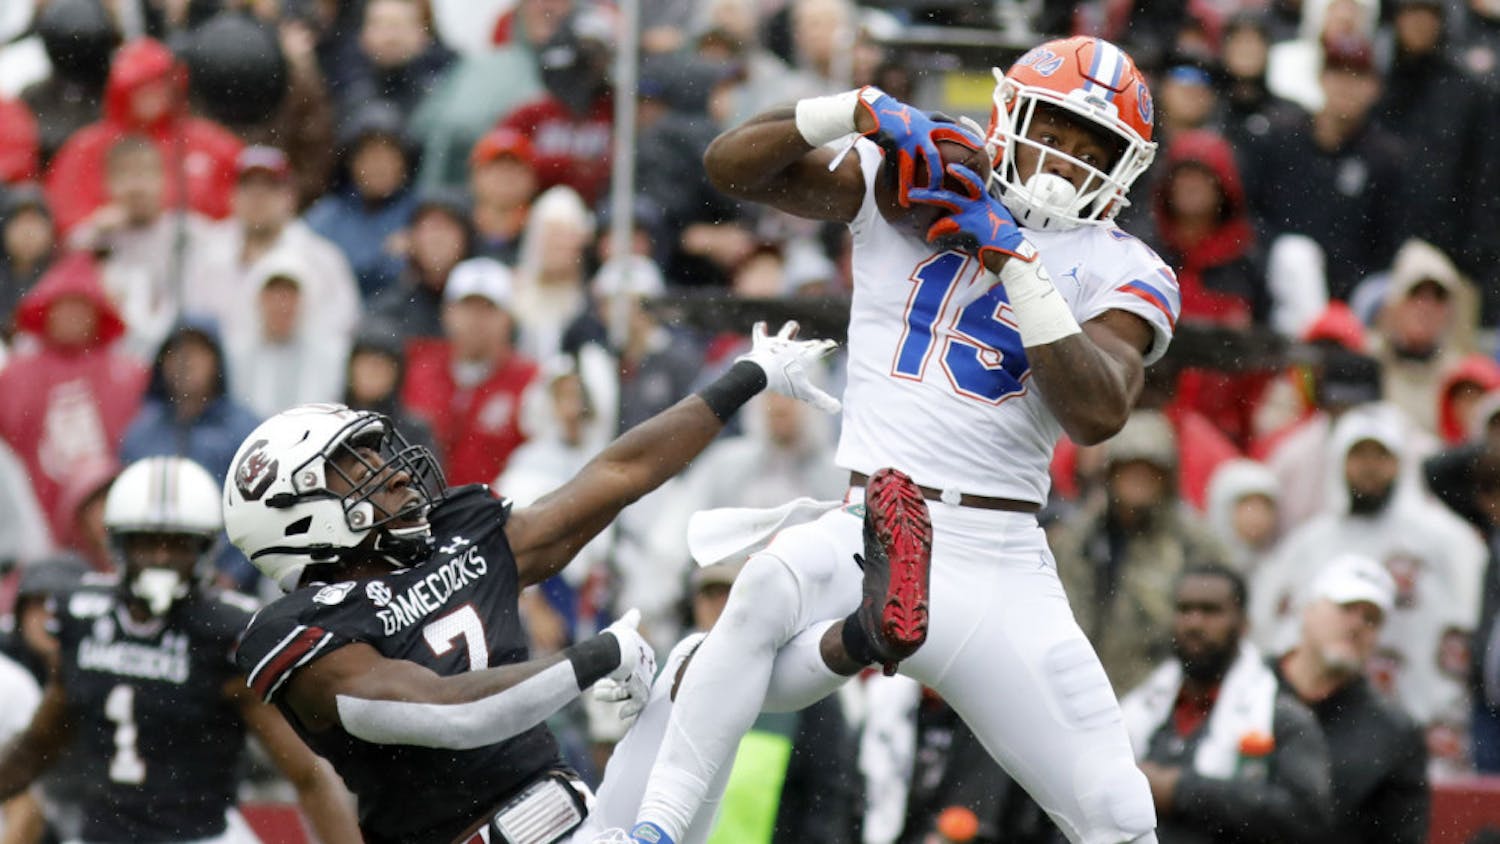 Jacob Copeland catches a touchdown against South Carolina in 2019. Copeland unveiled his personal logo Wednesday on the heels of the NIL bill going into effect Thursday.